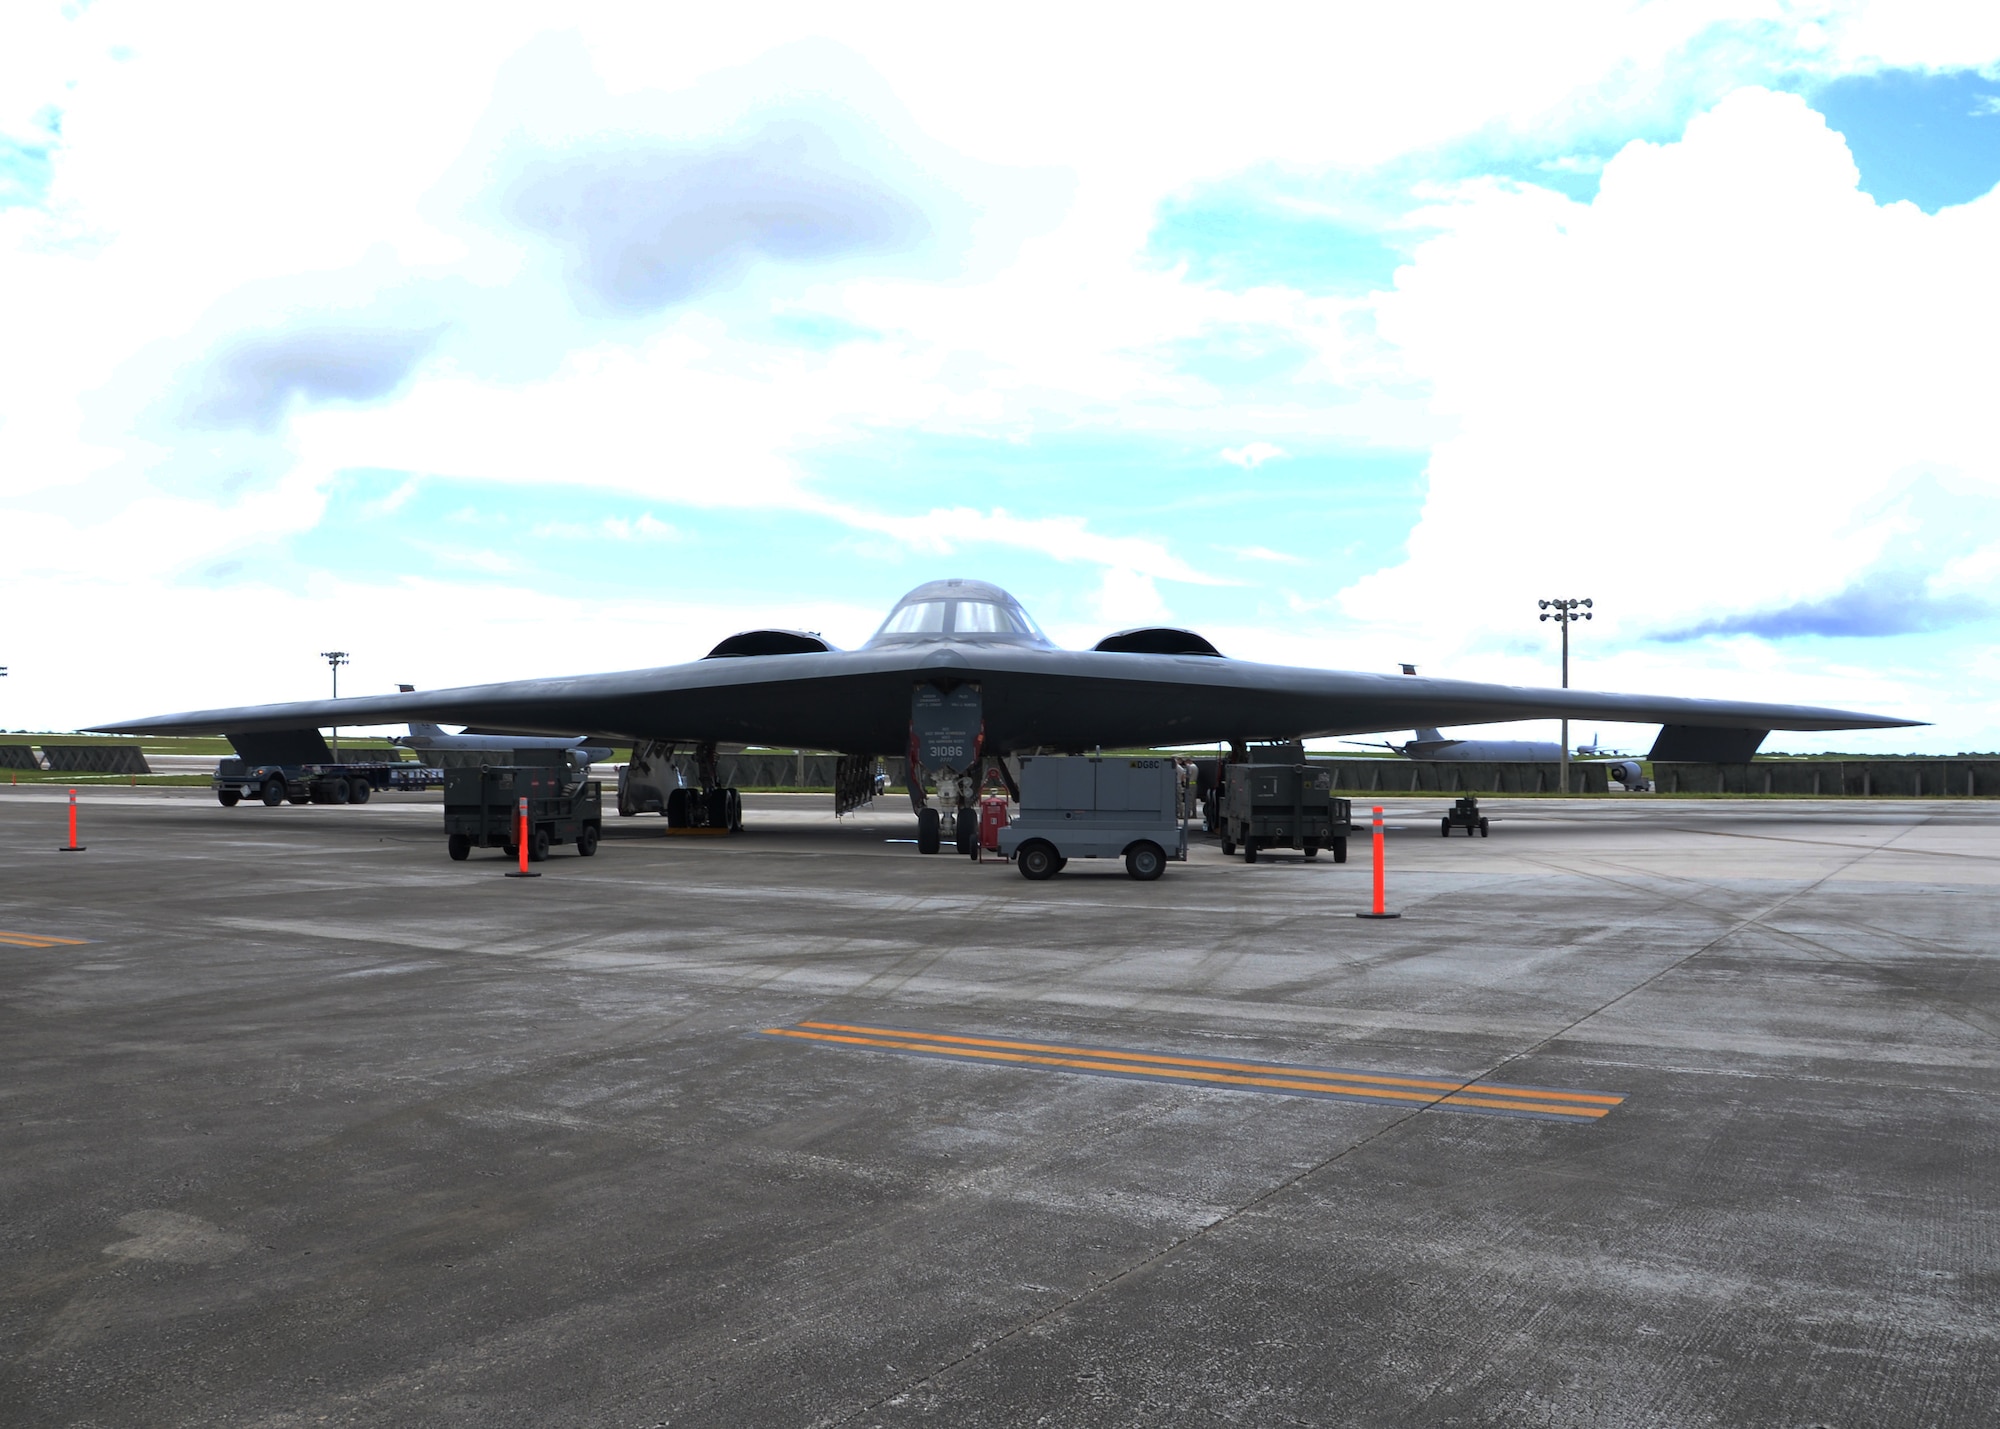 Airmen from the 509th Aircraft Maintenance Squadron work on a B-2 Spirit bomber during a deployment, Andersen Air Force Base, Guam, Aug. 22, 2014.The bombers and approximately 200 support Airmen, assigned to the 509th Bomb Wing at Whiteman Air Force Base, Mo., deployed to Guam Aug. 6, 2014 to improve combat readiness and ensure regional stability.  Bomber deployments help maintain stability in the region while allowing units to become familiar with operating in the theater according to USPACOM.  (U.S. Air Force photo by Senior Airman Cierra Presentado/Released)